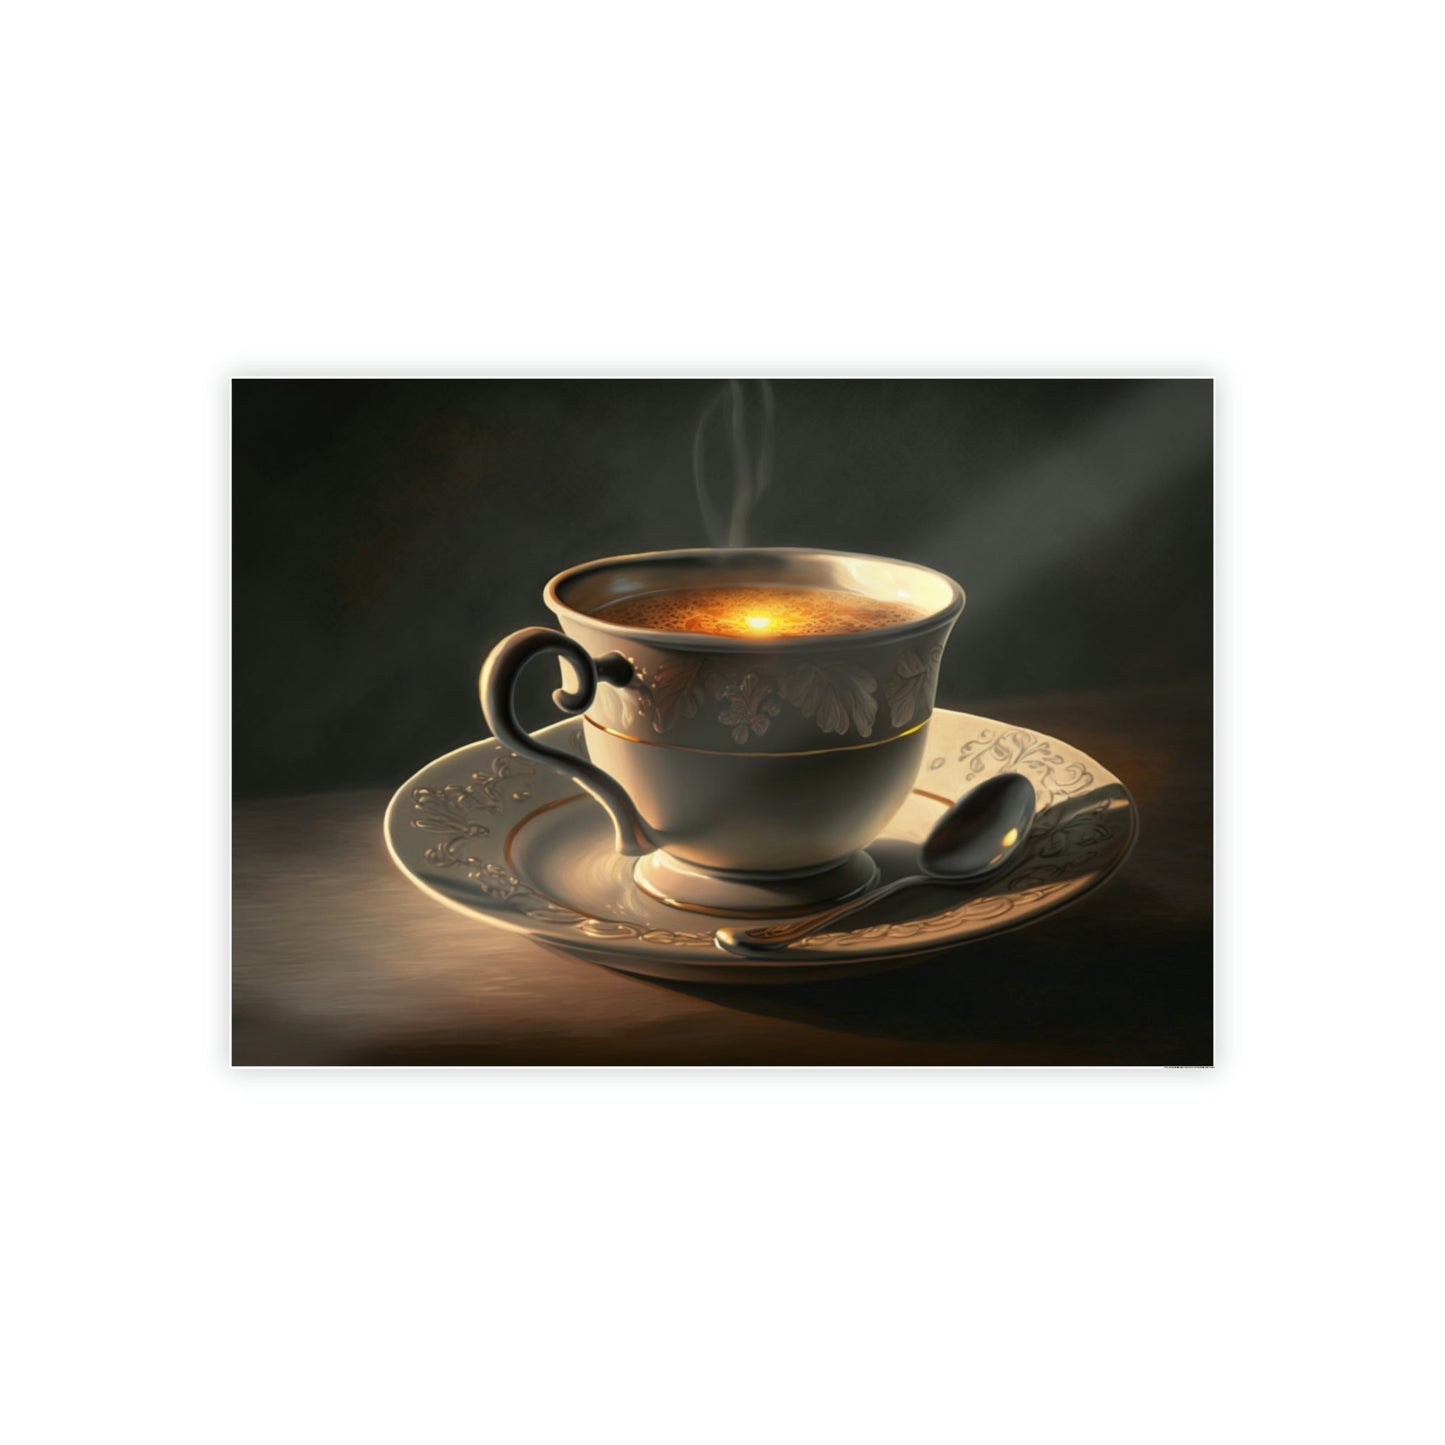 Coffee Delights: Artistic Depictions of Your Favorite Beverage on Canvas & Posters